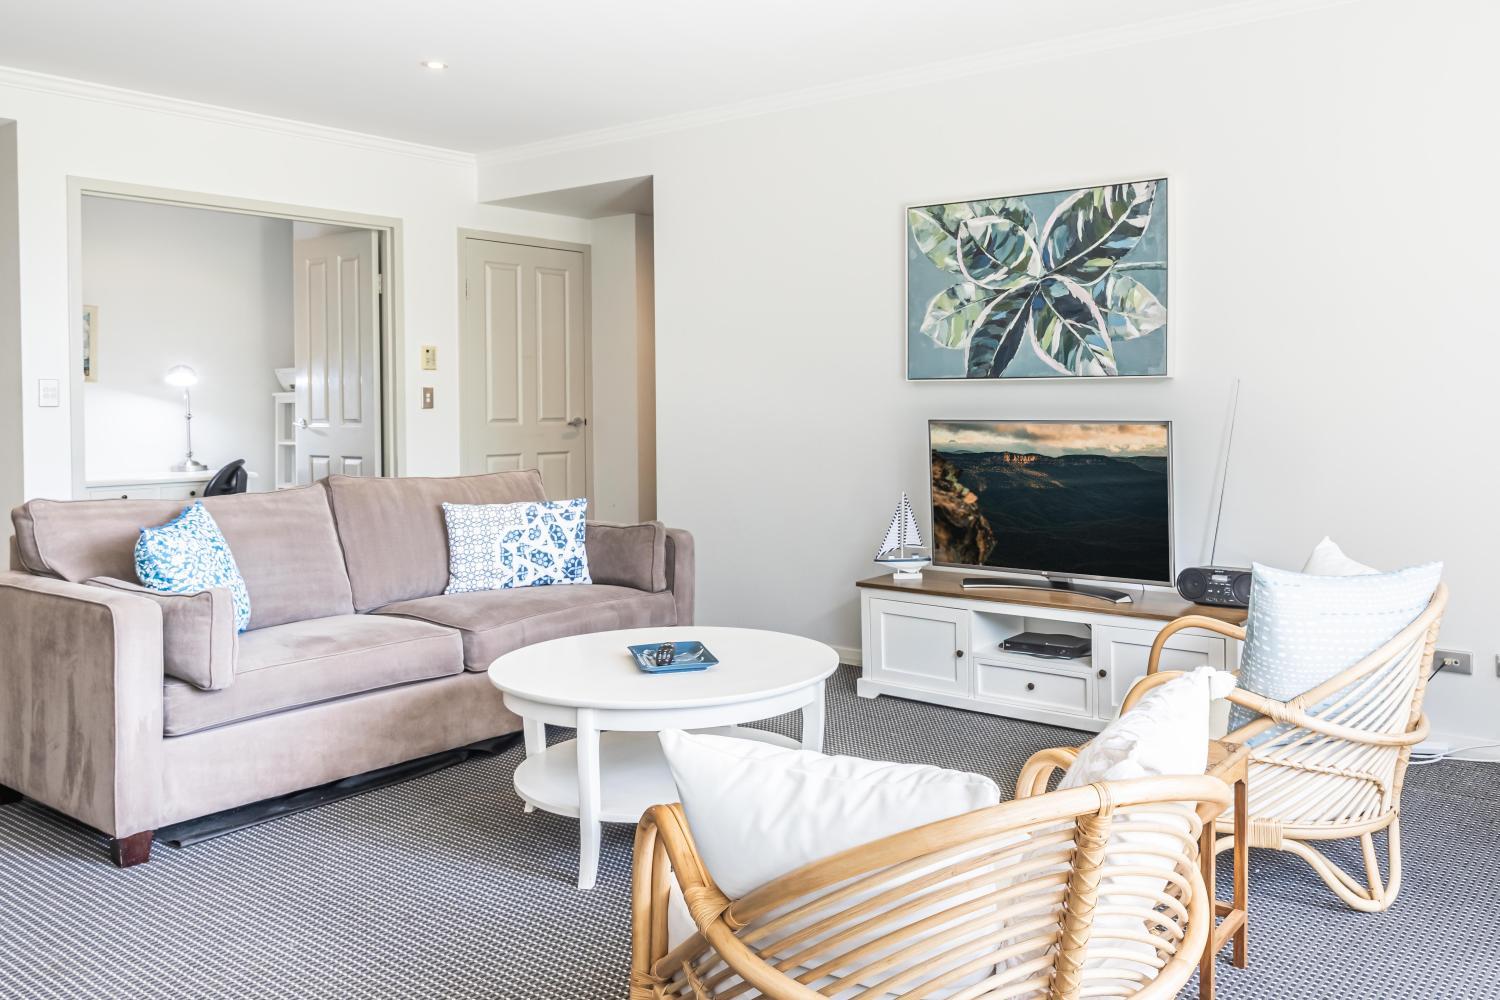 Others, Gorgeous 2-Bed Unit near Riverside Parks, Canada Bay - Drummoyne